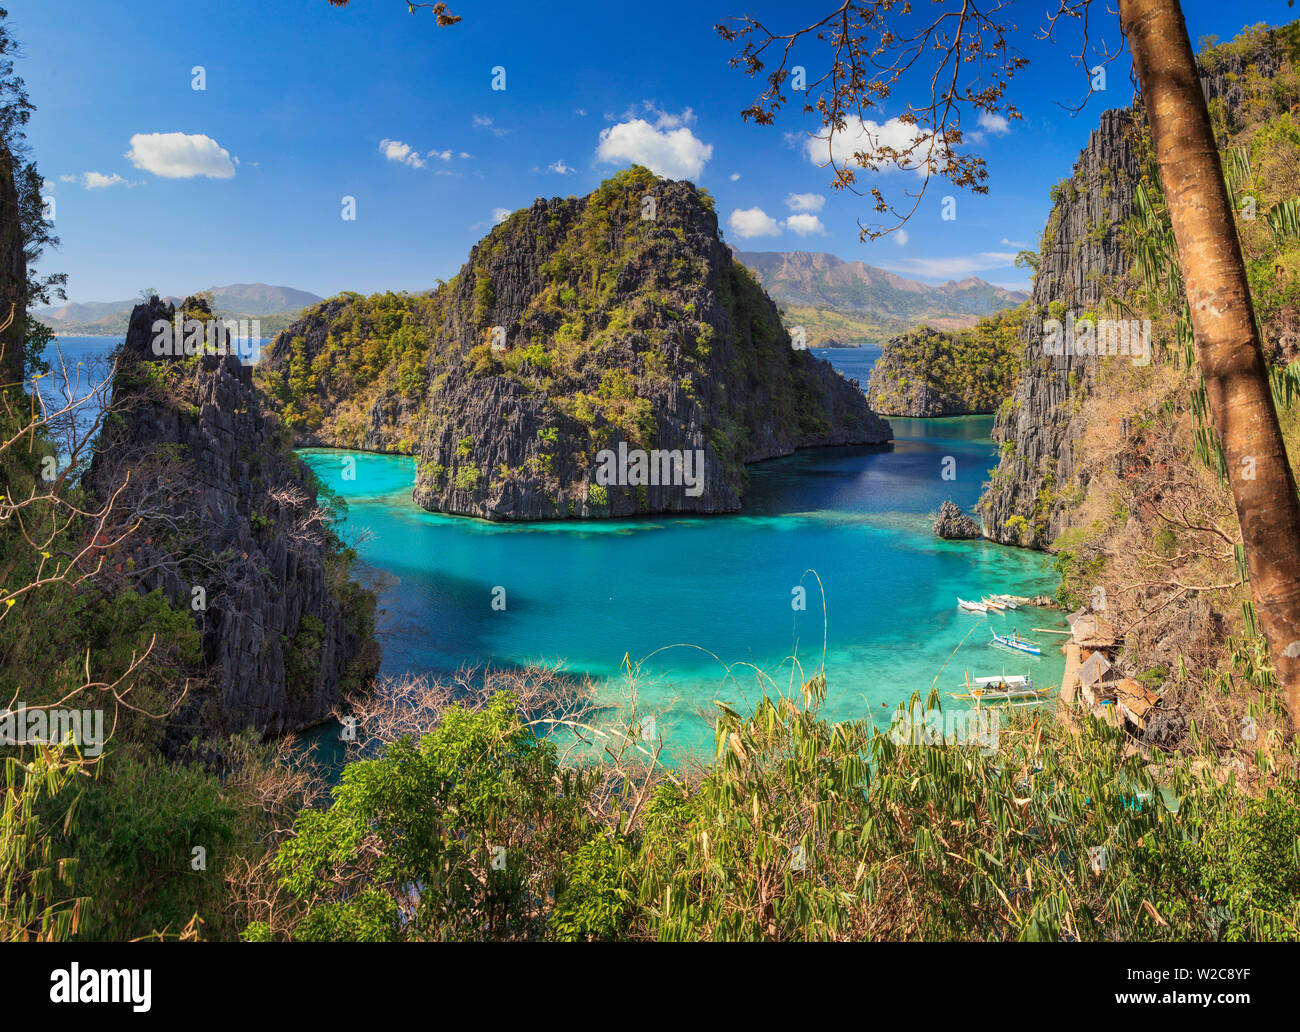 Philippines, Palawan, Coron Island, Kayangan Lake, elevated view from one of the limestone cliffs Stock Photo